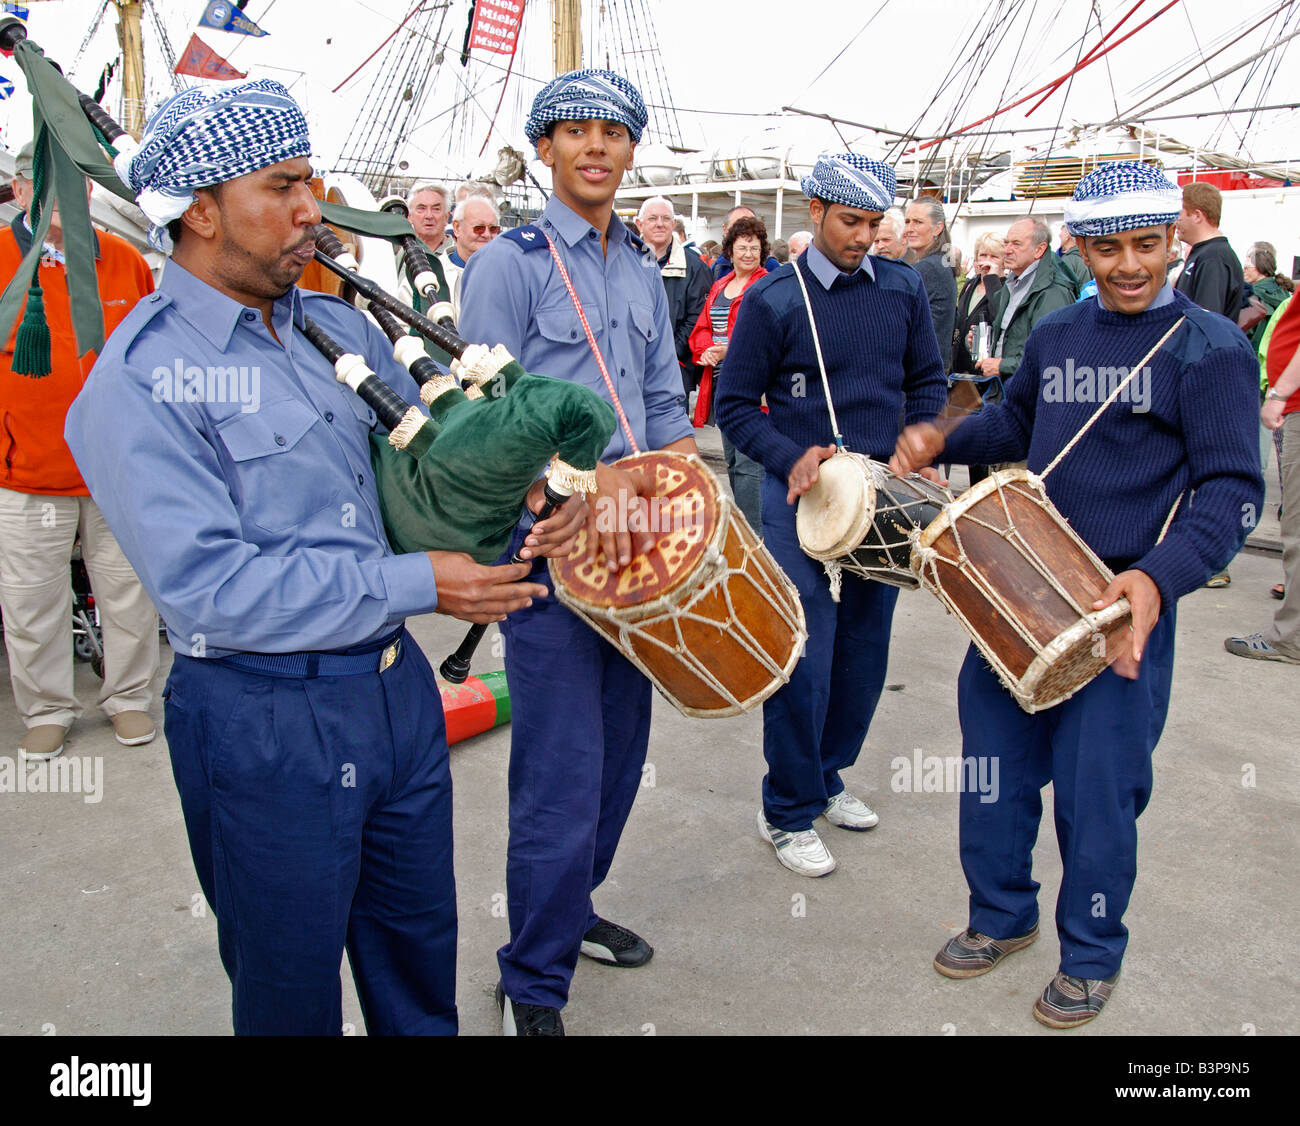 the crew of an oman ship entertain visitors to the tall ships pre- race festival at the docks in falmouth,cornwall,uk Stock Photo